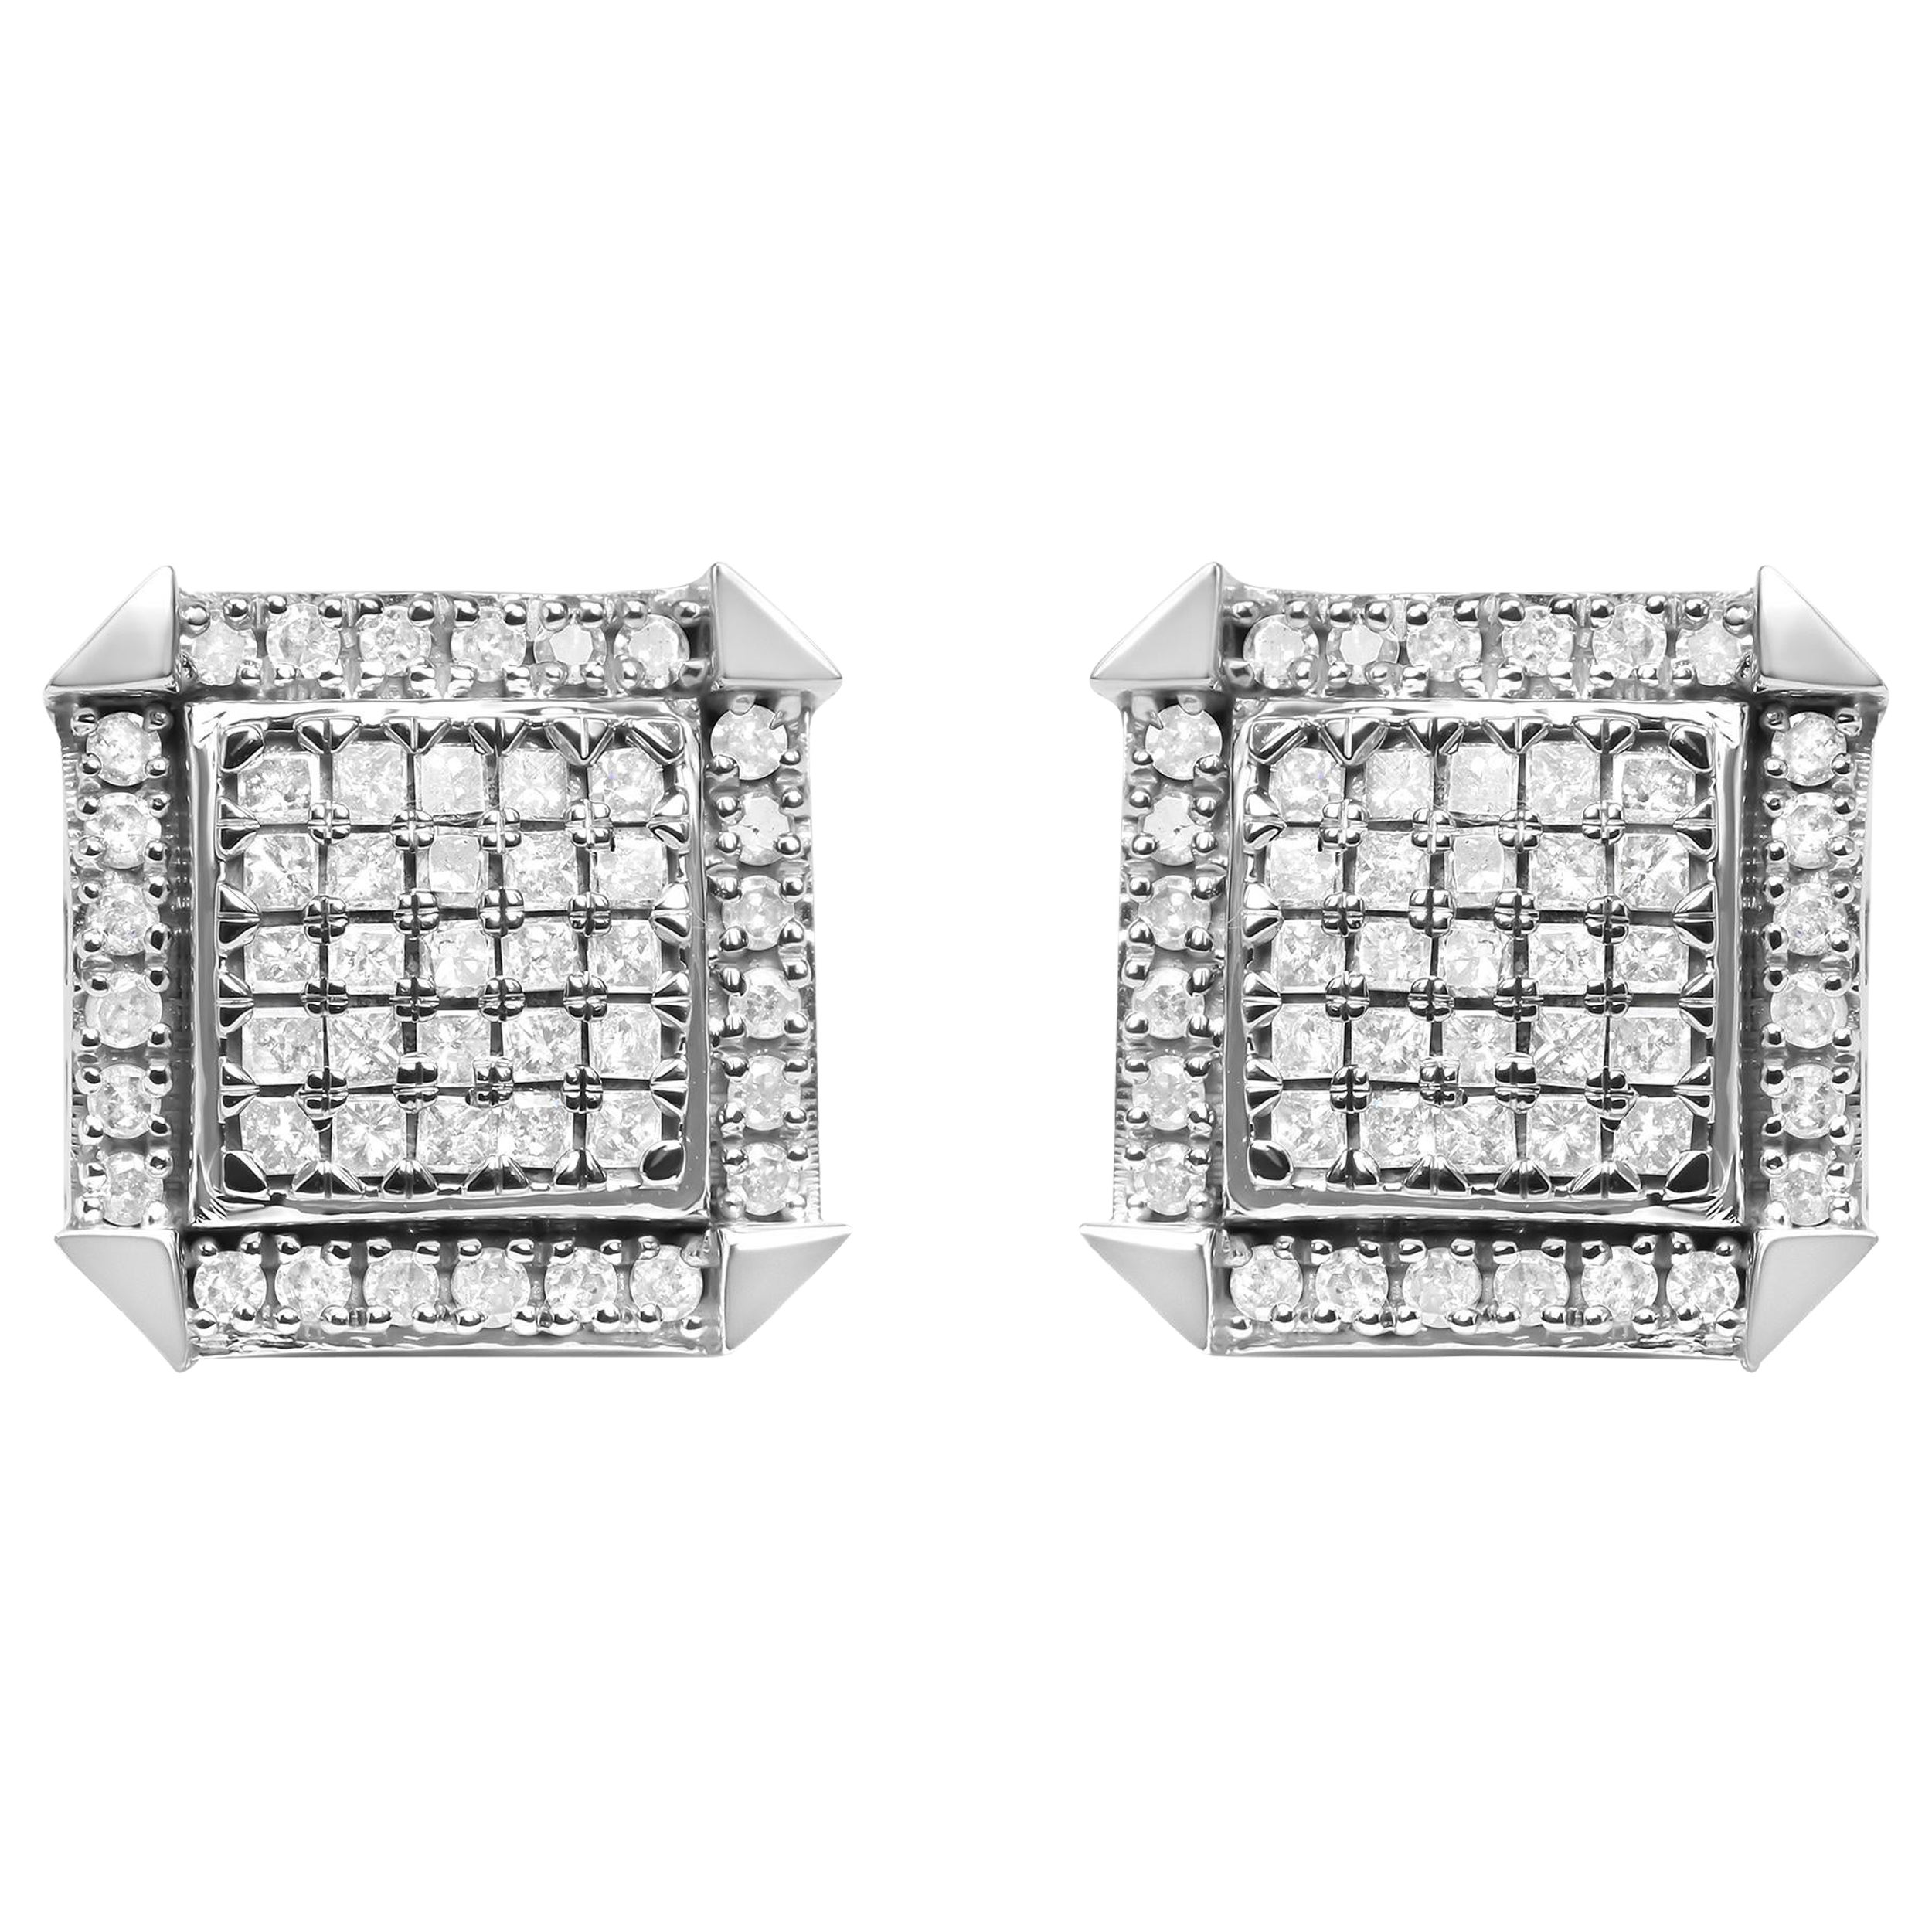 10K White Gold 1.0 Carat Diamond  Composite with Halo Stud Earrings 